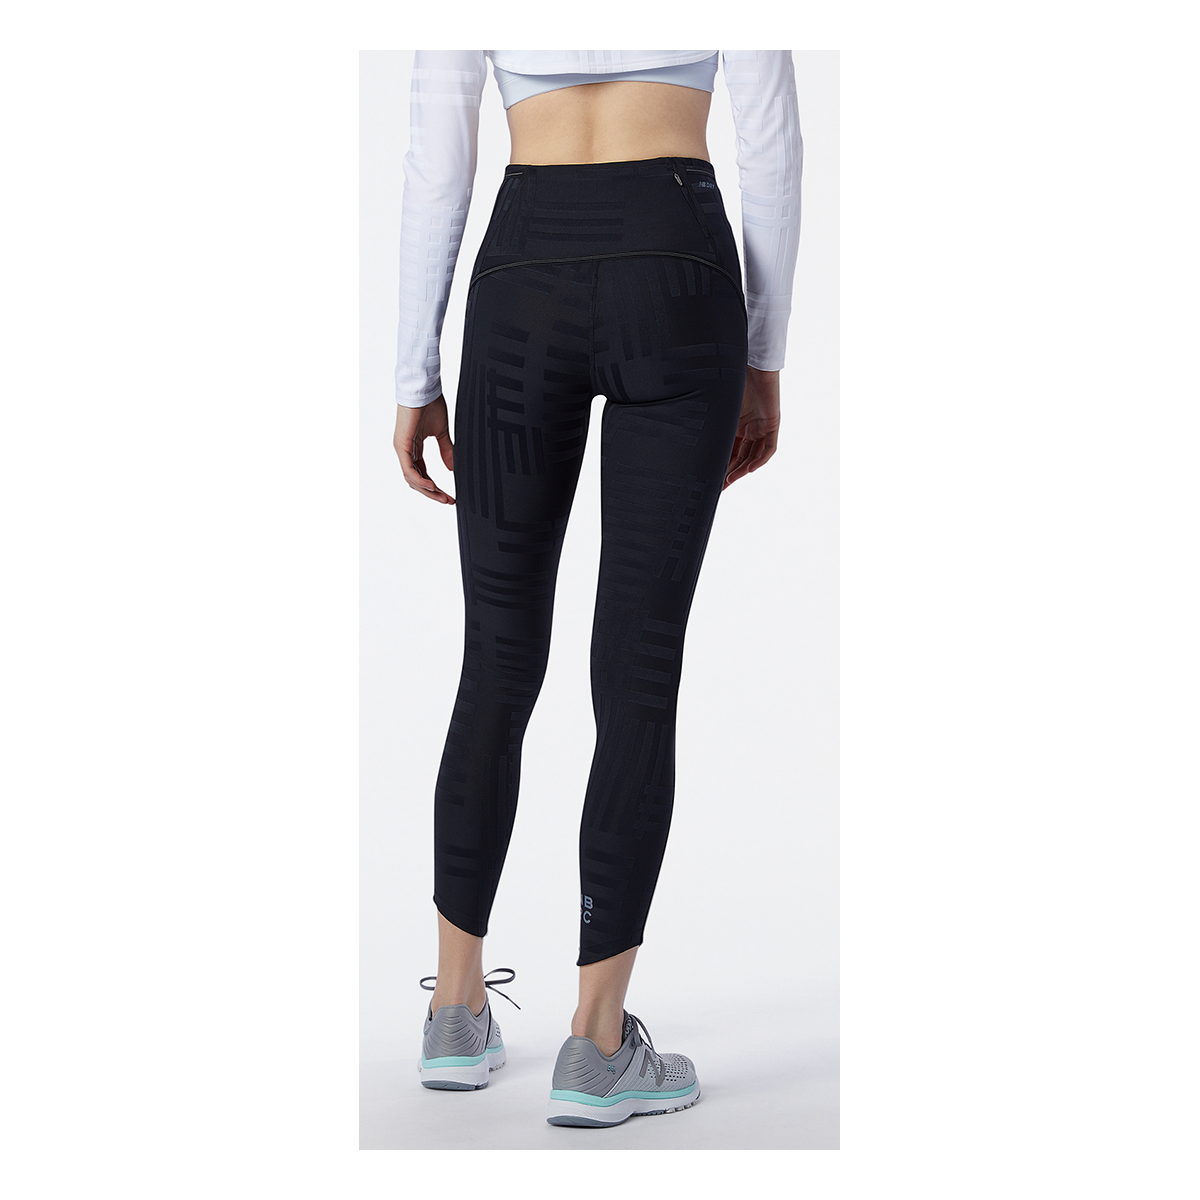 New Balance Q Speed Tight, , large image number null